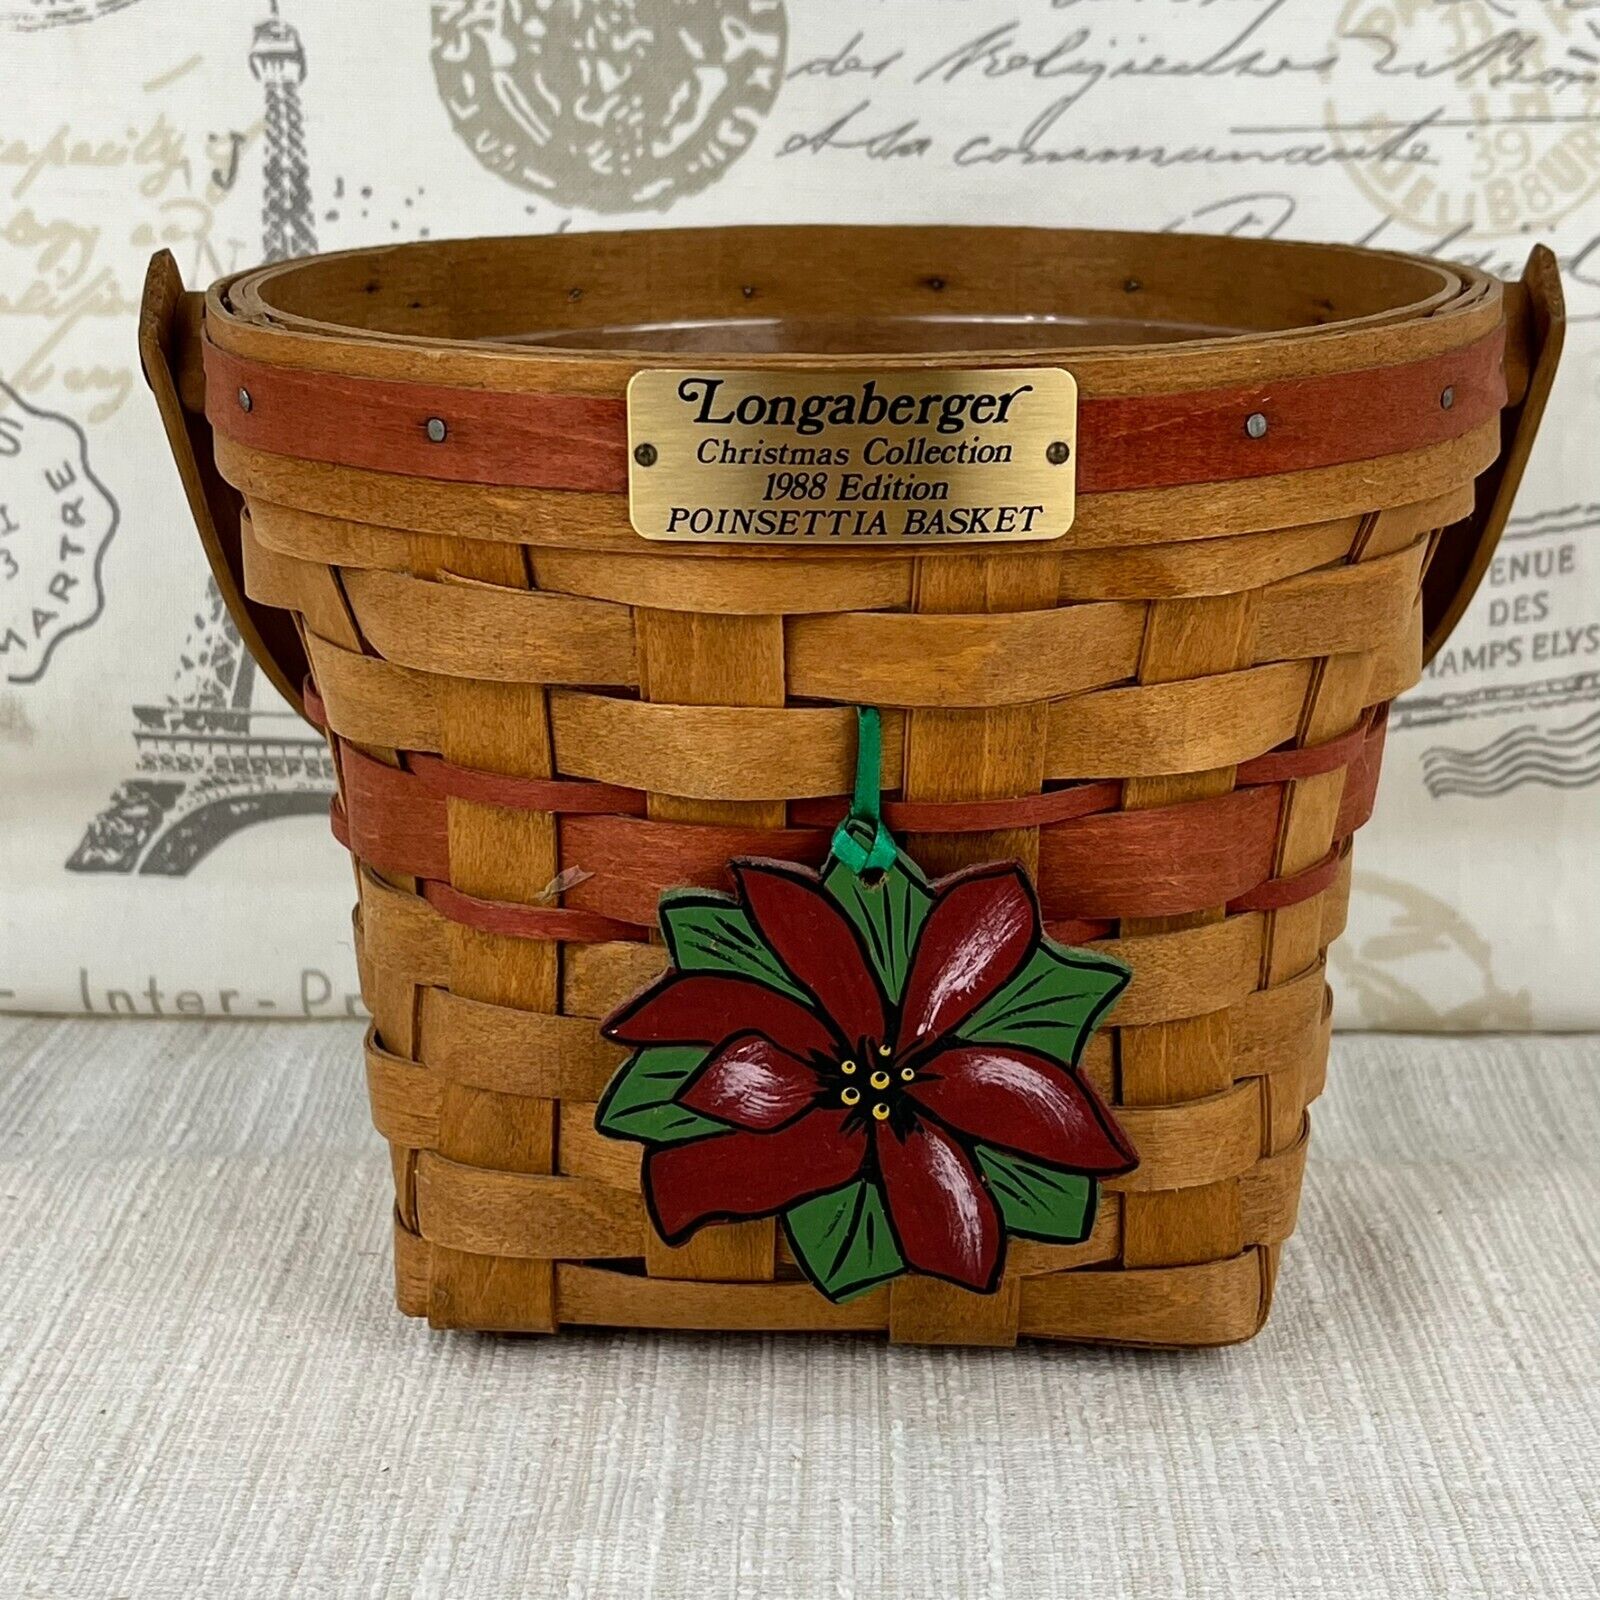 Longaberger 1988 Christmas Collection Poinsettia Basket with Tie-On + Protector